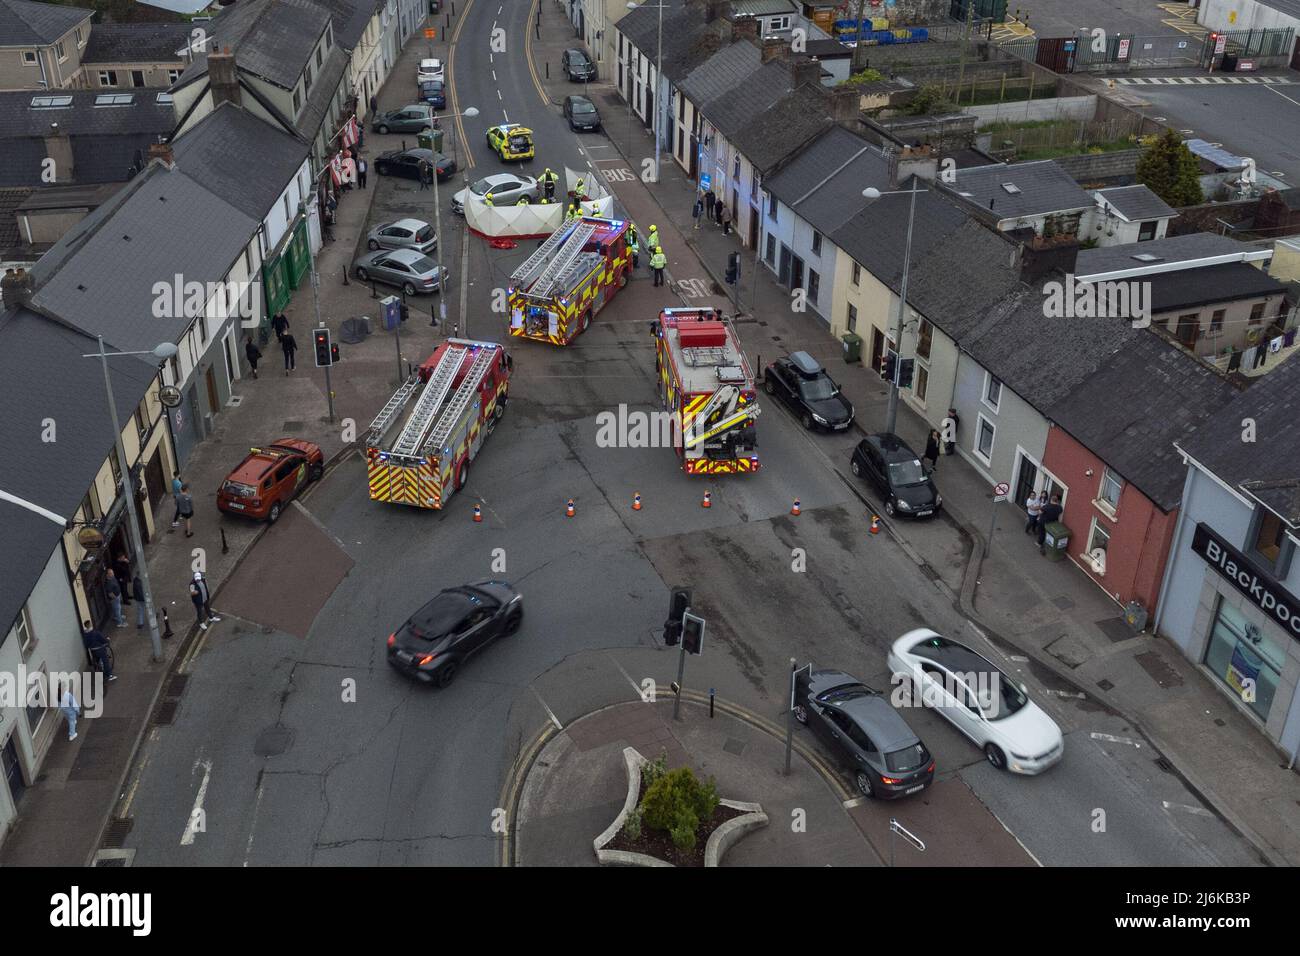 Cork, Ireland, 2nd May 2022. Pedestrian Knocked Down, Dublin Street, Blackpool, Cork, Ireland. PLEASE DO NOT ADD MY NAME TO THE CREDITS FOR THESE PHOTOS IF USED. Aerial photo of the sCork, Ireland, 2nd May 2022. Pedestrian Knocked Down, Dublin Street, Blackpool, Cork, Ireland. PLEASE DO NOT ADD MY NAME TO THE CREDITS FOR THESE PHOTOS IF USED. Aerial photo of the scene at the junction of Dublin Hill and Dublin Street. Shortly before 8 pm this evening three units of Cork City Fire Brigade attended the scene of a collision where it is believed a car reversed into a pedestrian. Stock Photo